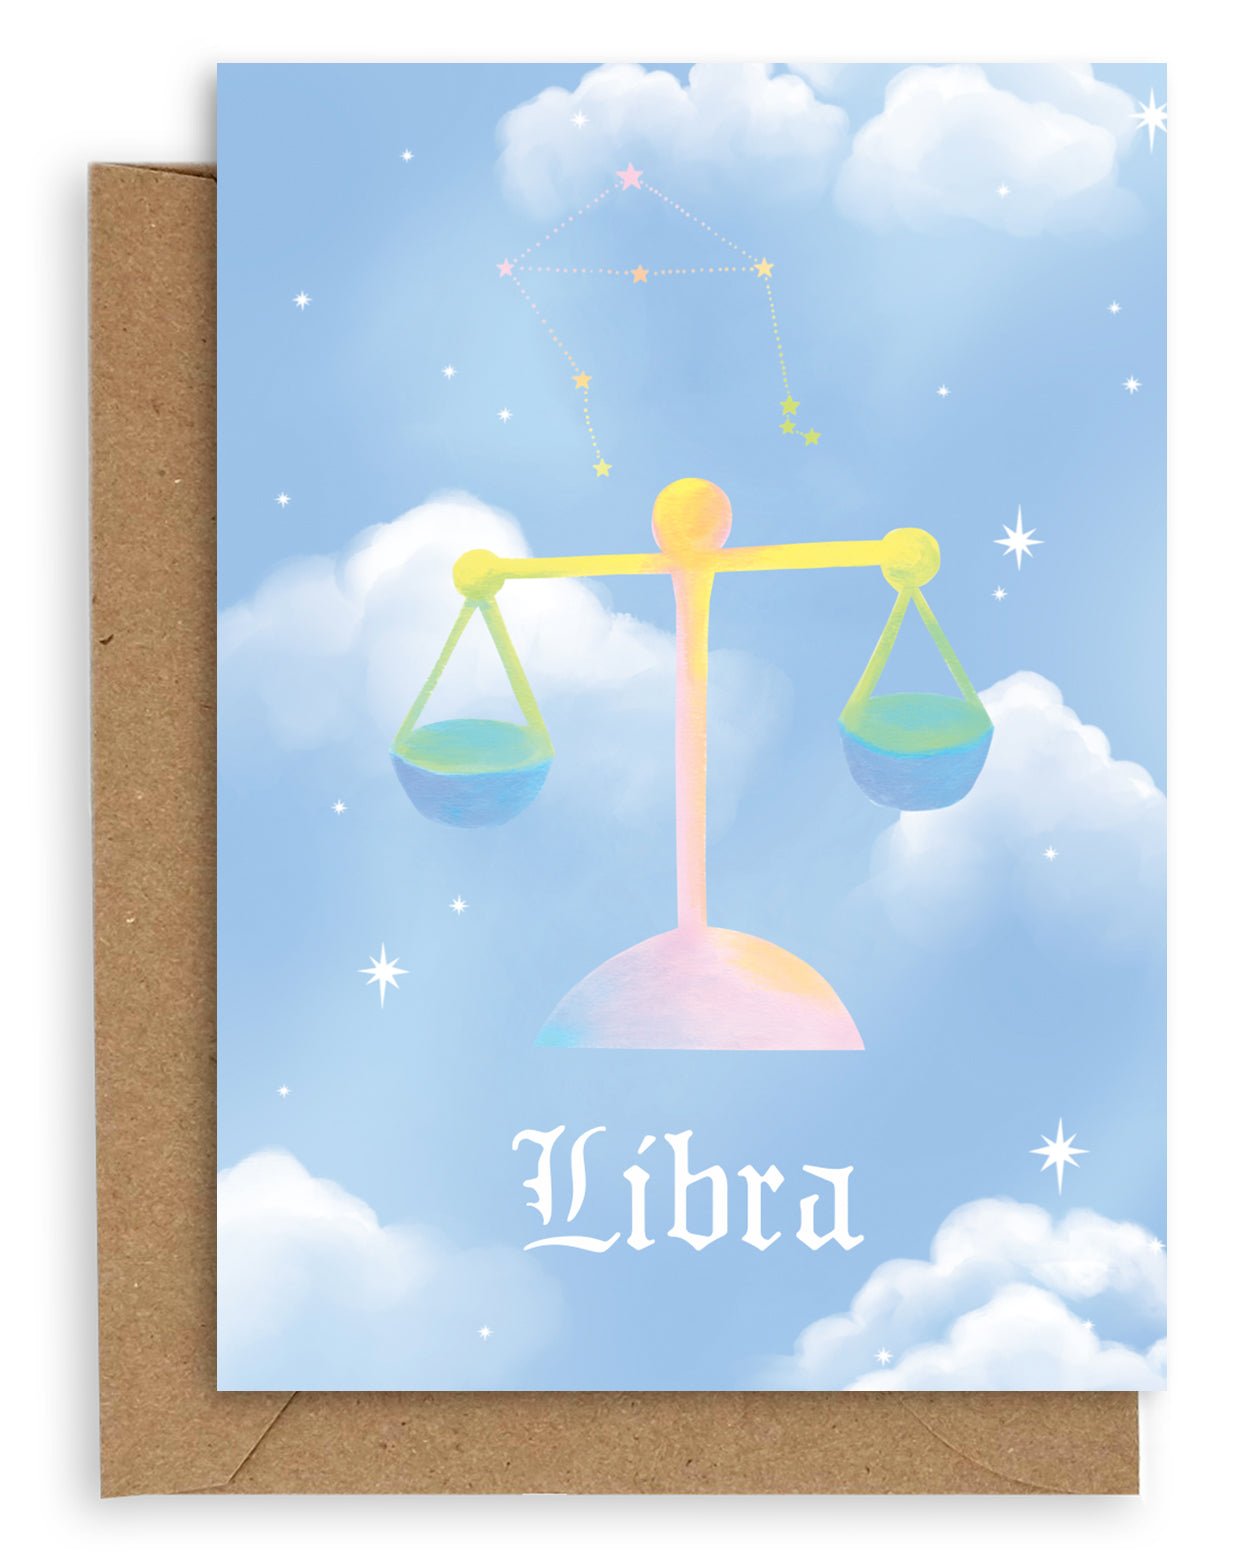 Libra  Horoscope card with a kraft envelope. The horoscope symbol is painted in rainbow pastel on a blue background with white clouds. 